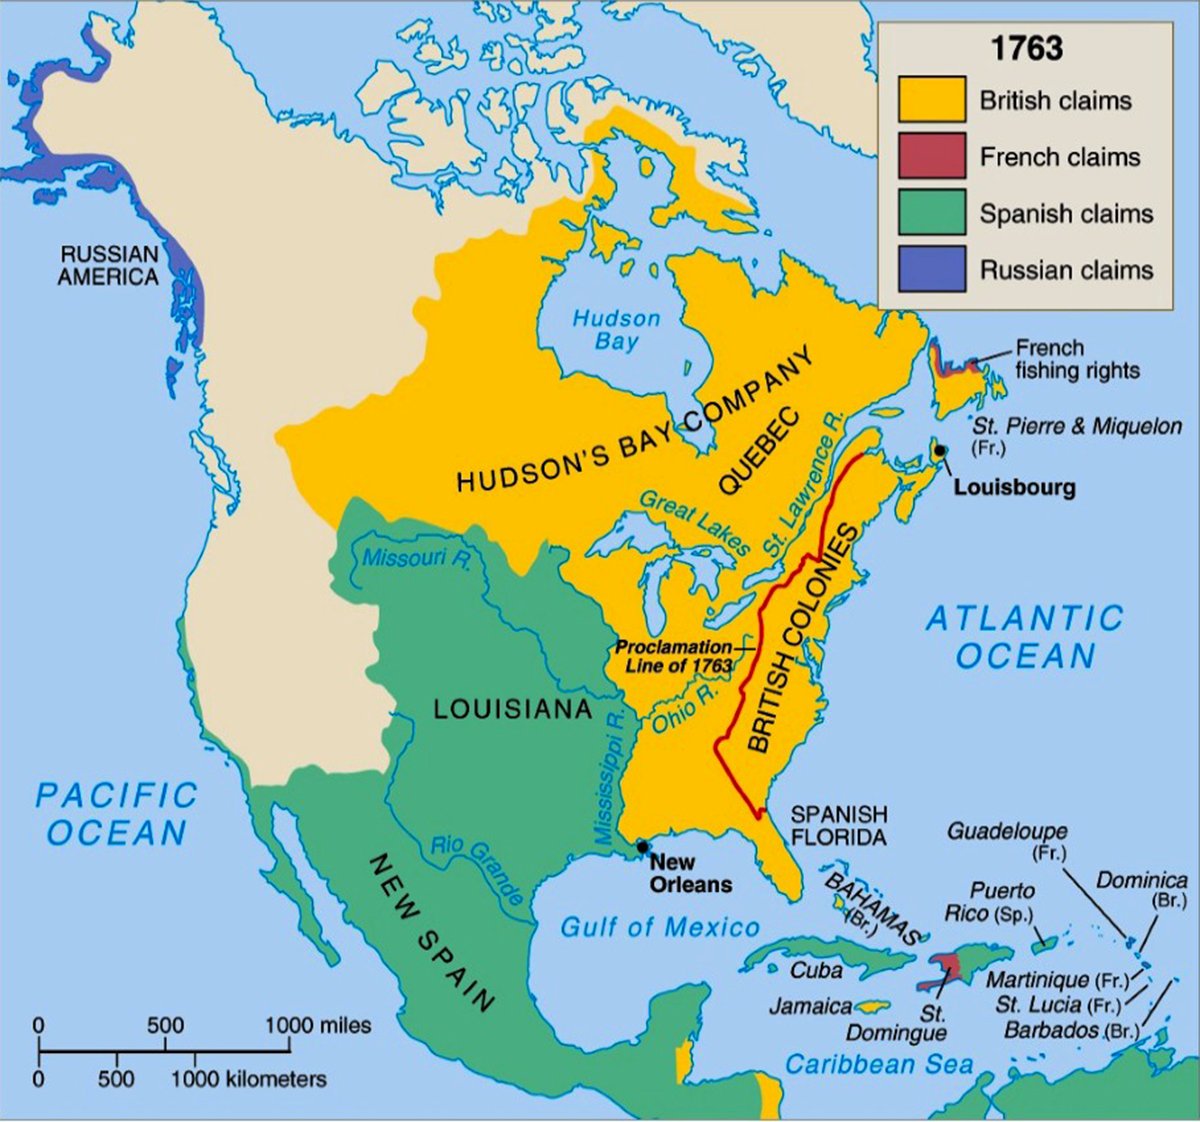 A color-coded map showing the territorial claims in North America following the Treaty of Paris in 1763. The map highlights British claims in yellow, French claims in red, Spanish claims in green, and Russian claims in purple. It indicates key locations such as the Hudson's Bay Company territory, Quebec, Louisiana, New Spain, and the British Colonies. The Proclamation Line of 1763 is also marked, delineating the boundary beyond which British colonists were prohibited to settle, in an attempt to stabilize relations with Native American peoples.